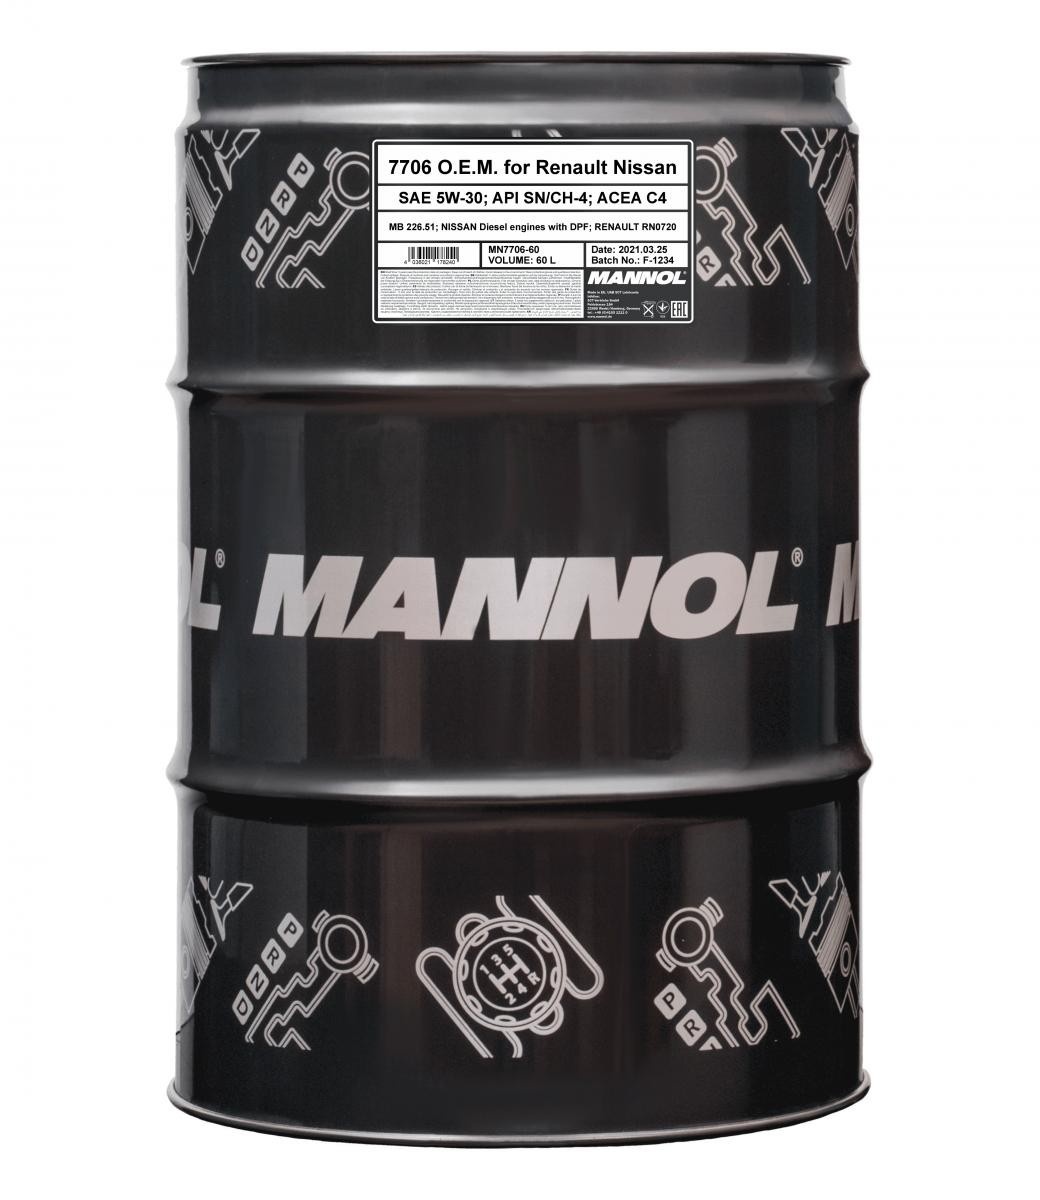 Моторное масло Mannol O.E.M. for Renault Nissan 5W-30 7706 60L